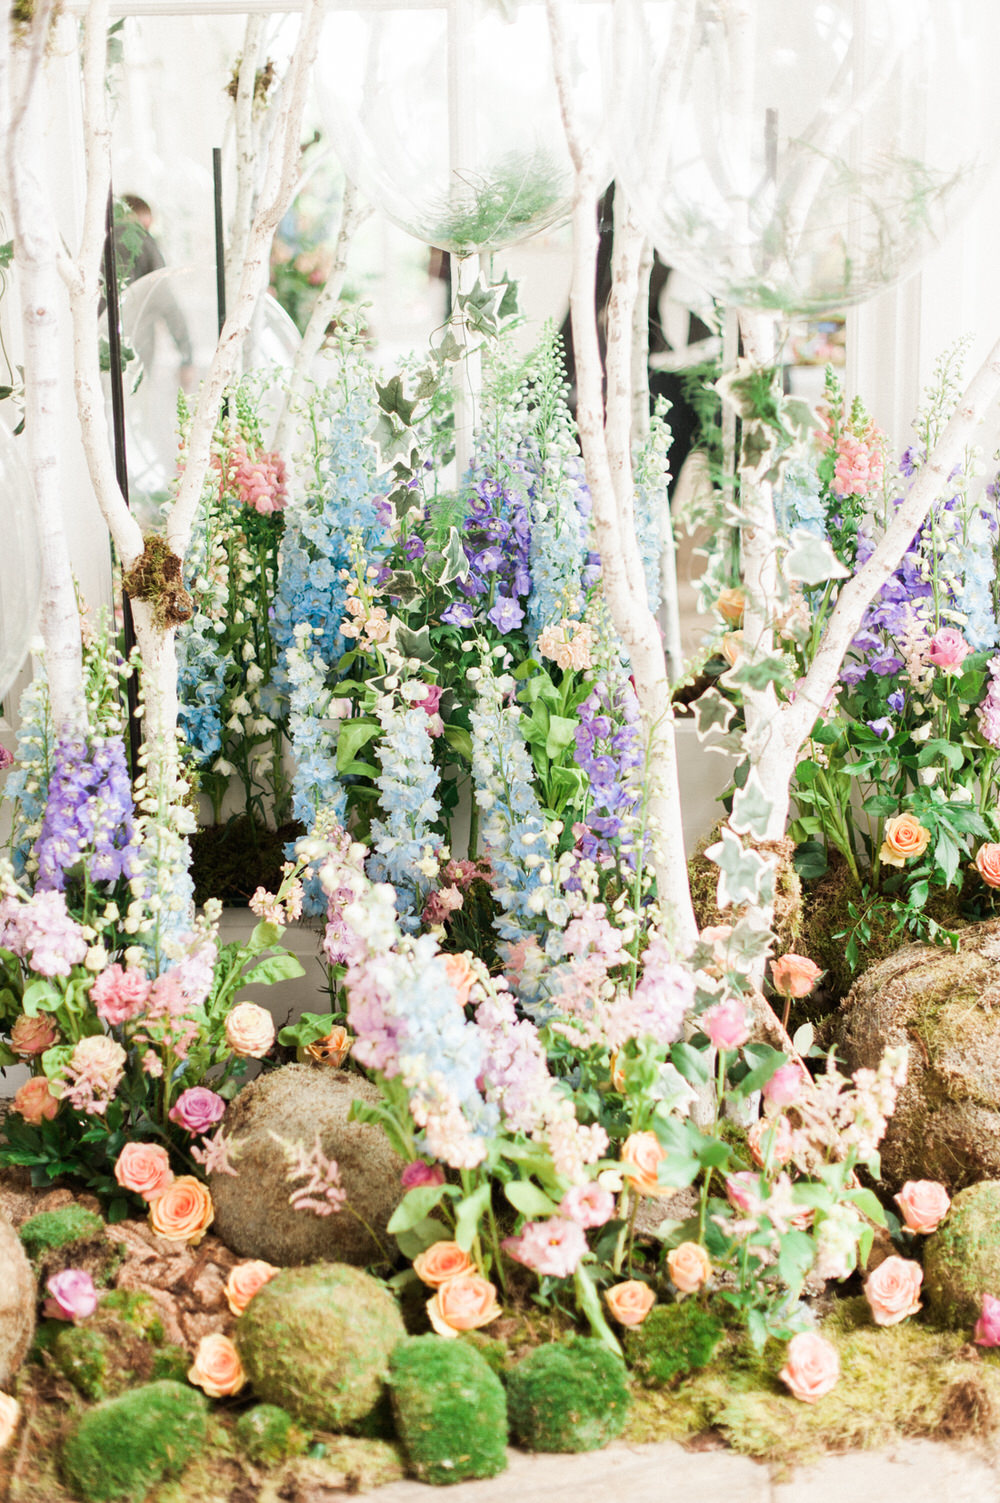 Stunning floral display | | Purple, blue and peace flowers | Pastel wildflower Display | Floral centrepieces | Wildflower centrepiece | Summer florals | Childrens Party | A Midsummer nights dream inspired children's birthday party with stunning floral, fairy entertainment, crafts and a picnic. Photos by Kate Nielen.